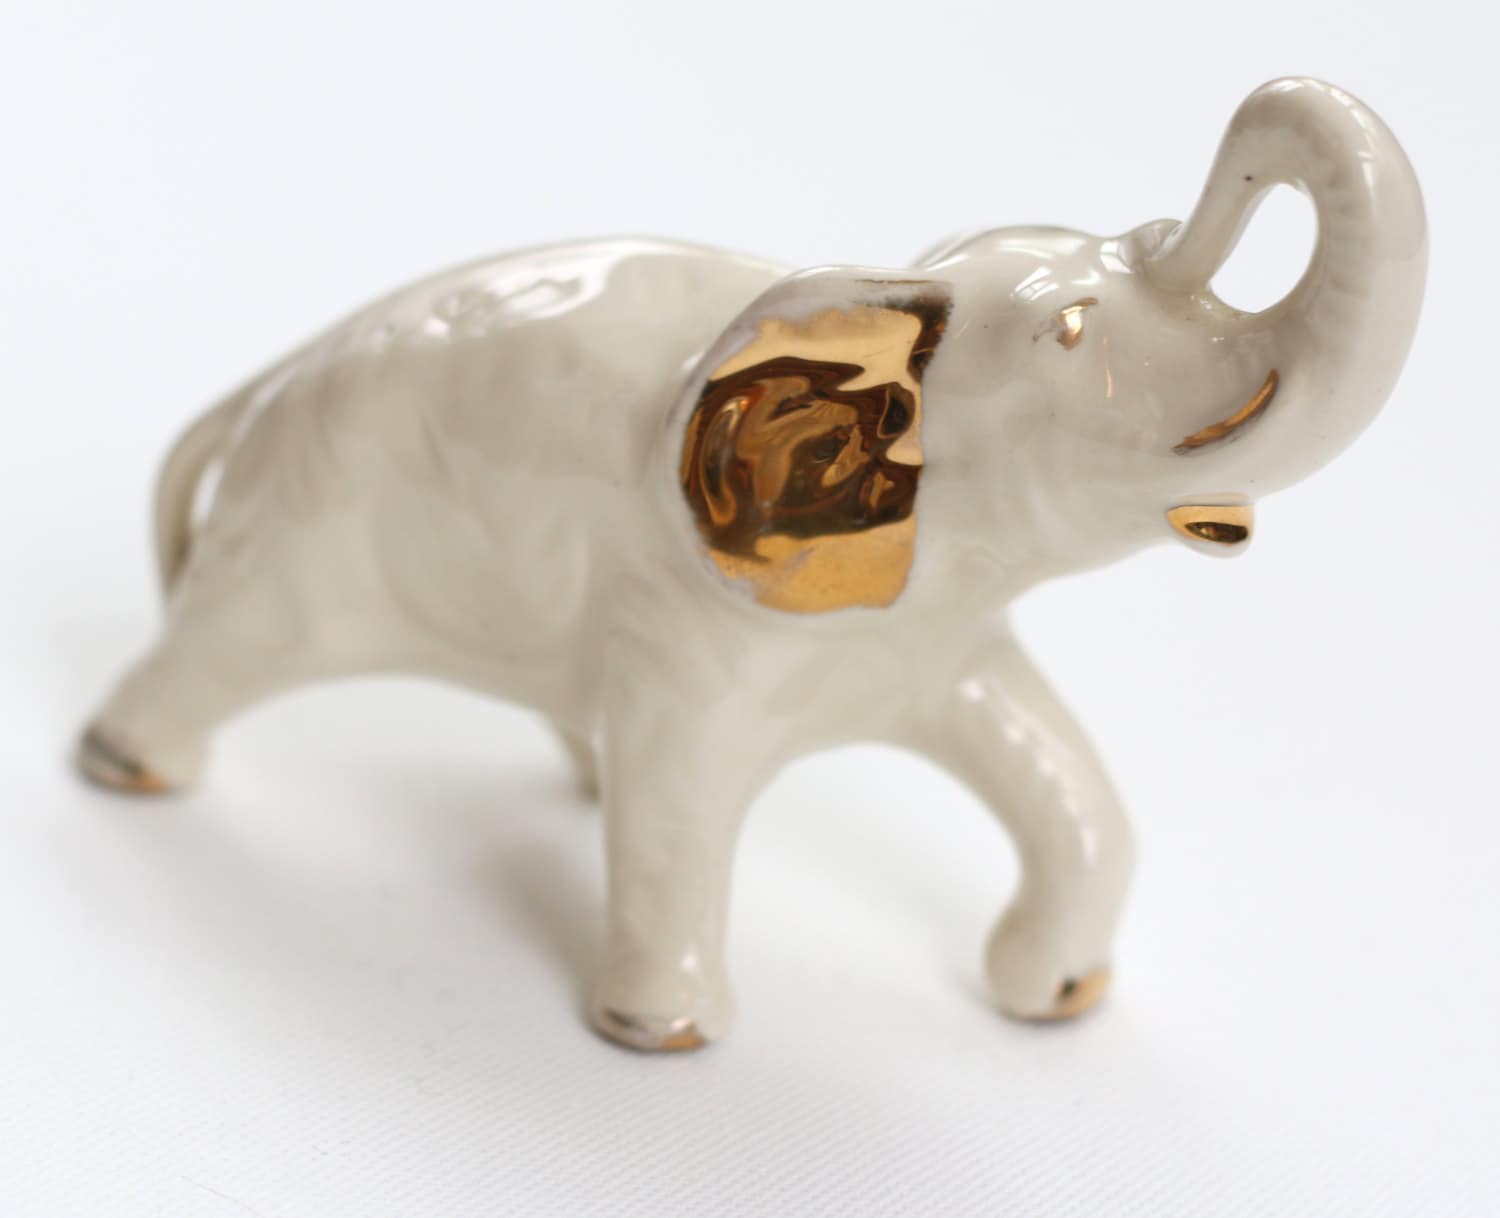 Antique White Elephant Figurine with Gold Accents